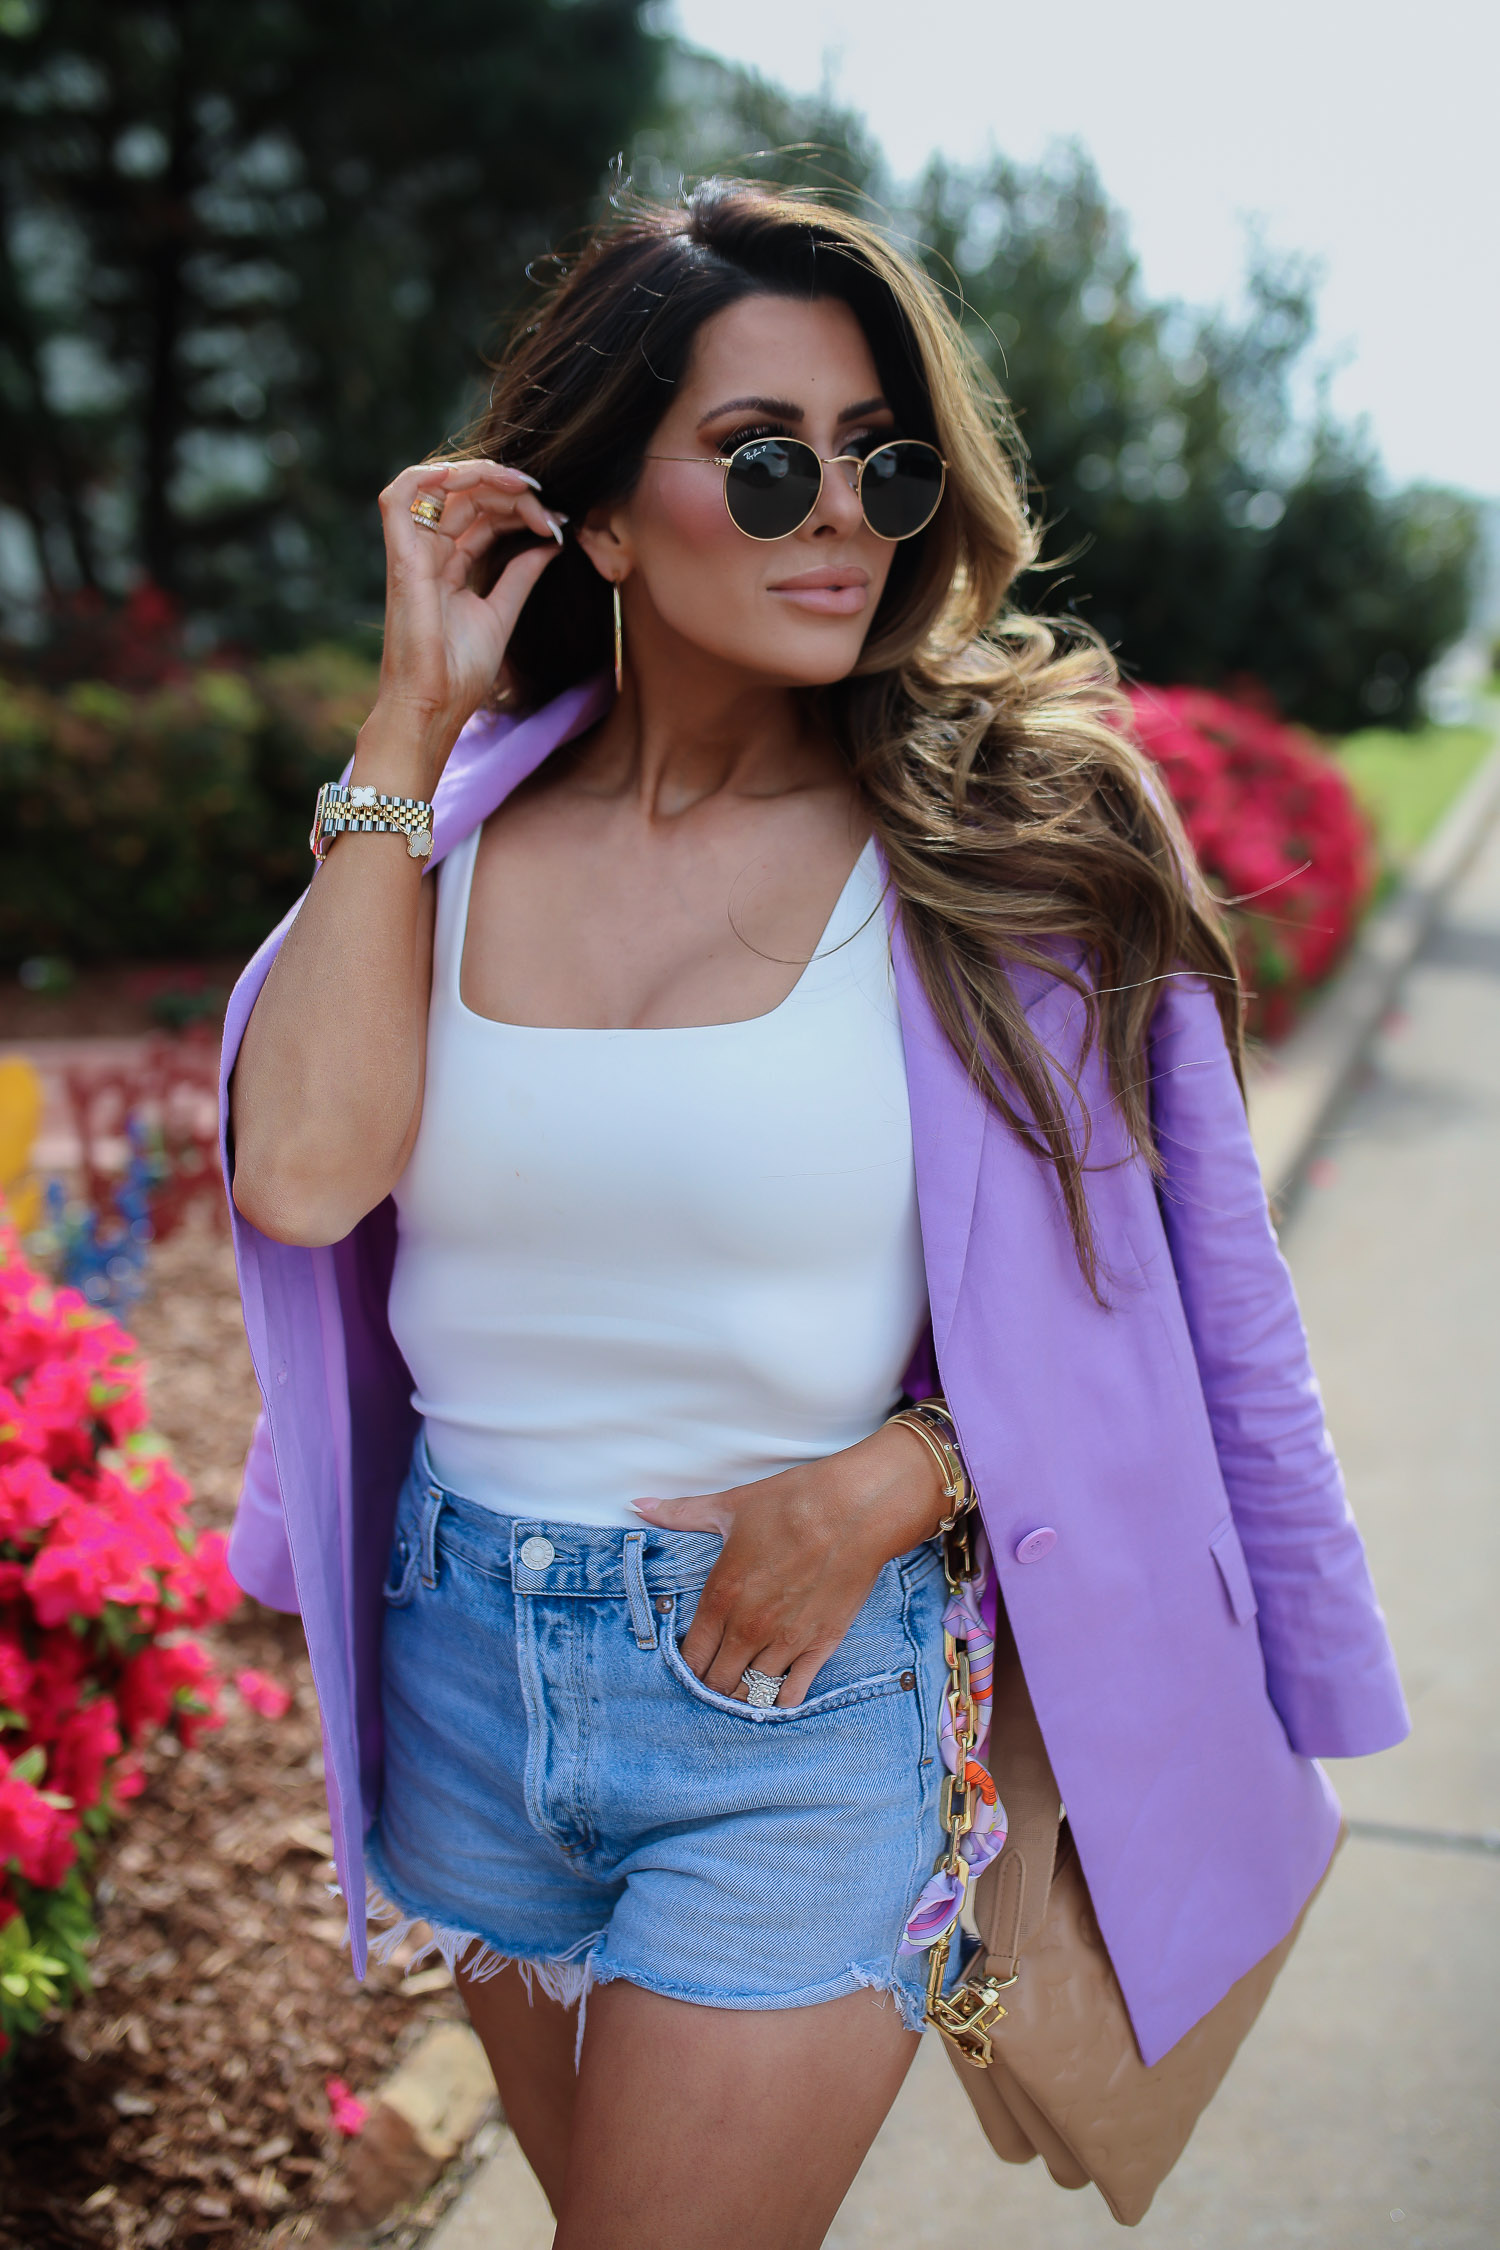 Good American modern tank, Good American tank review, Good American tops, Best women white tank top 2022, oversized lavender blazer womens, spring oversized blazer trend 2022, nordstrom womens oversized blazer, hermes lavender twilly, coussin PM tan review, AGOLDE jean shorts review, emily gemma